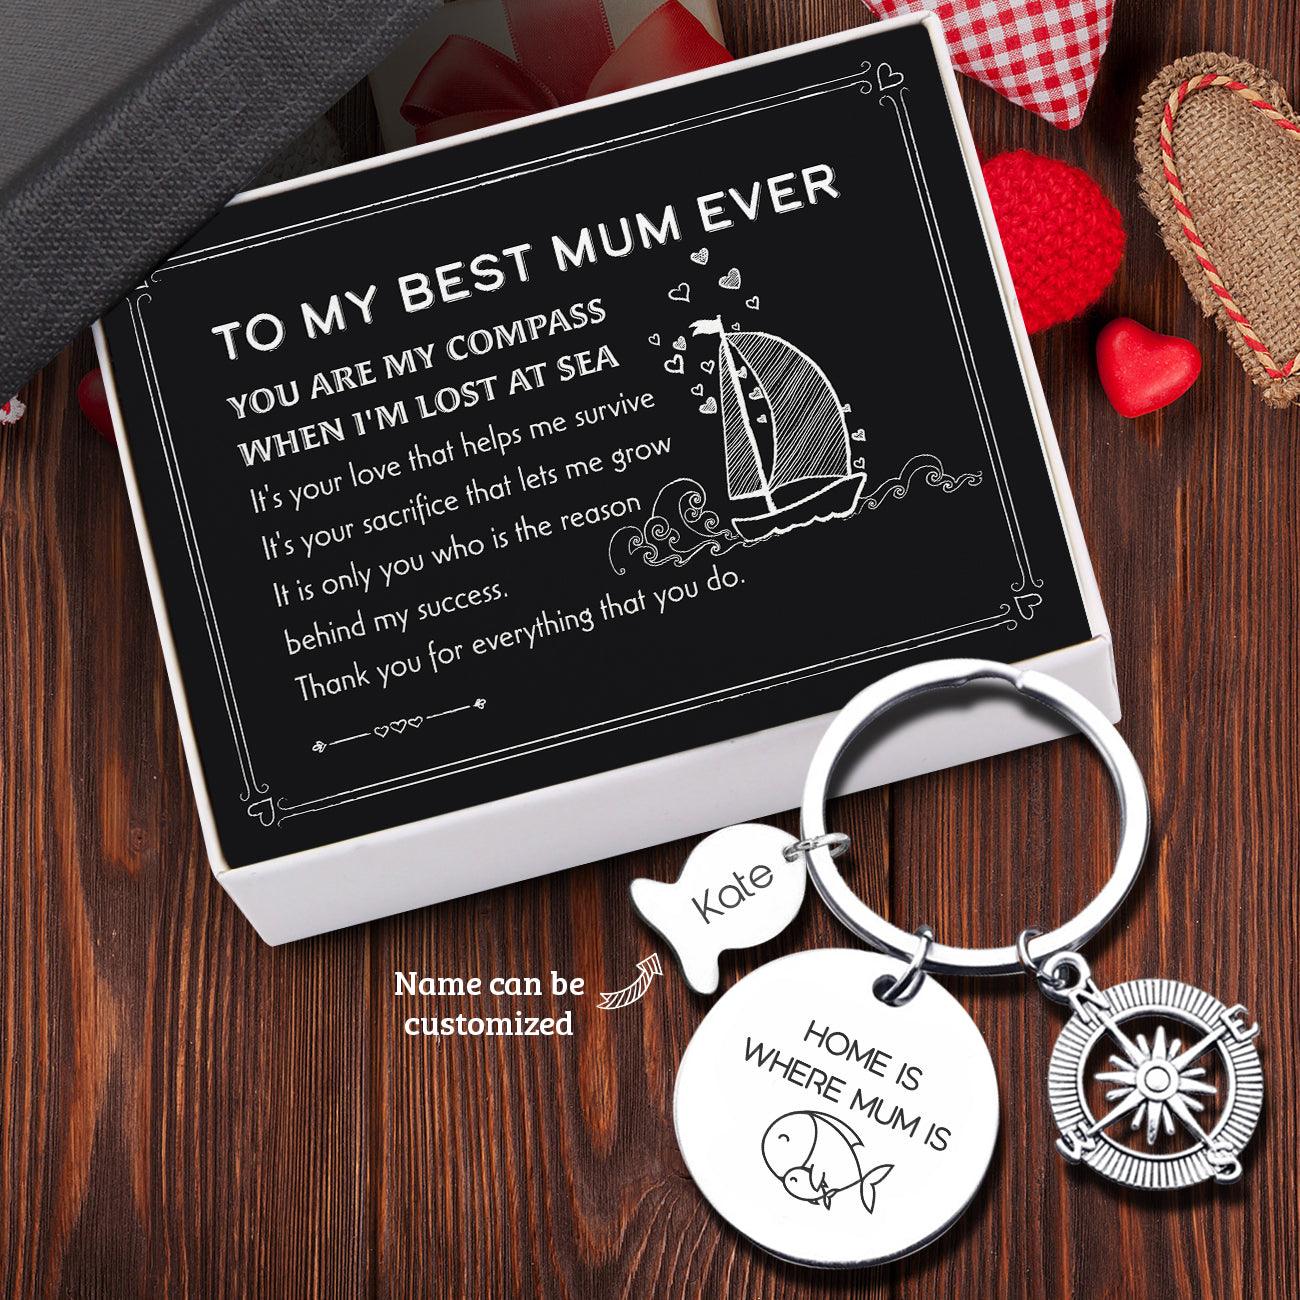 Personalised Fishing Compass Keychain - Fishing - To My Mum - You Are The Compass - Augkwb19001 - Gifts Holder